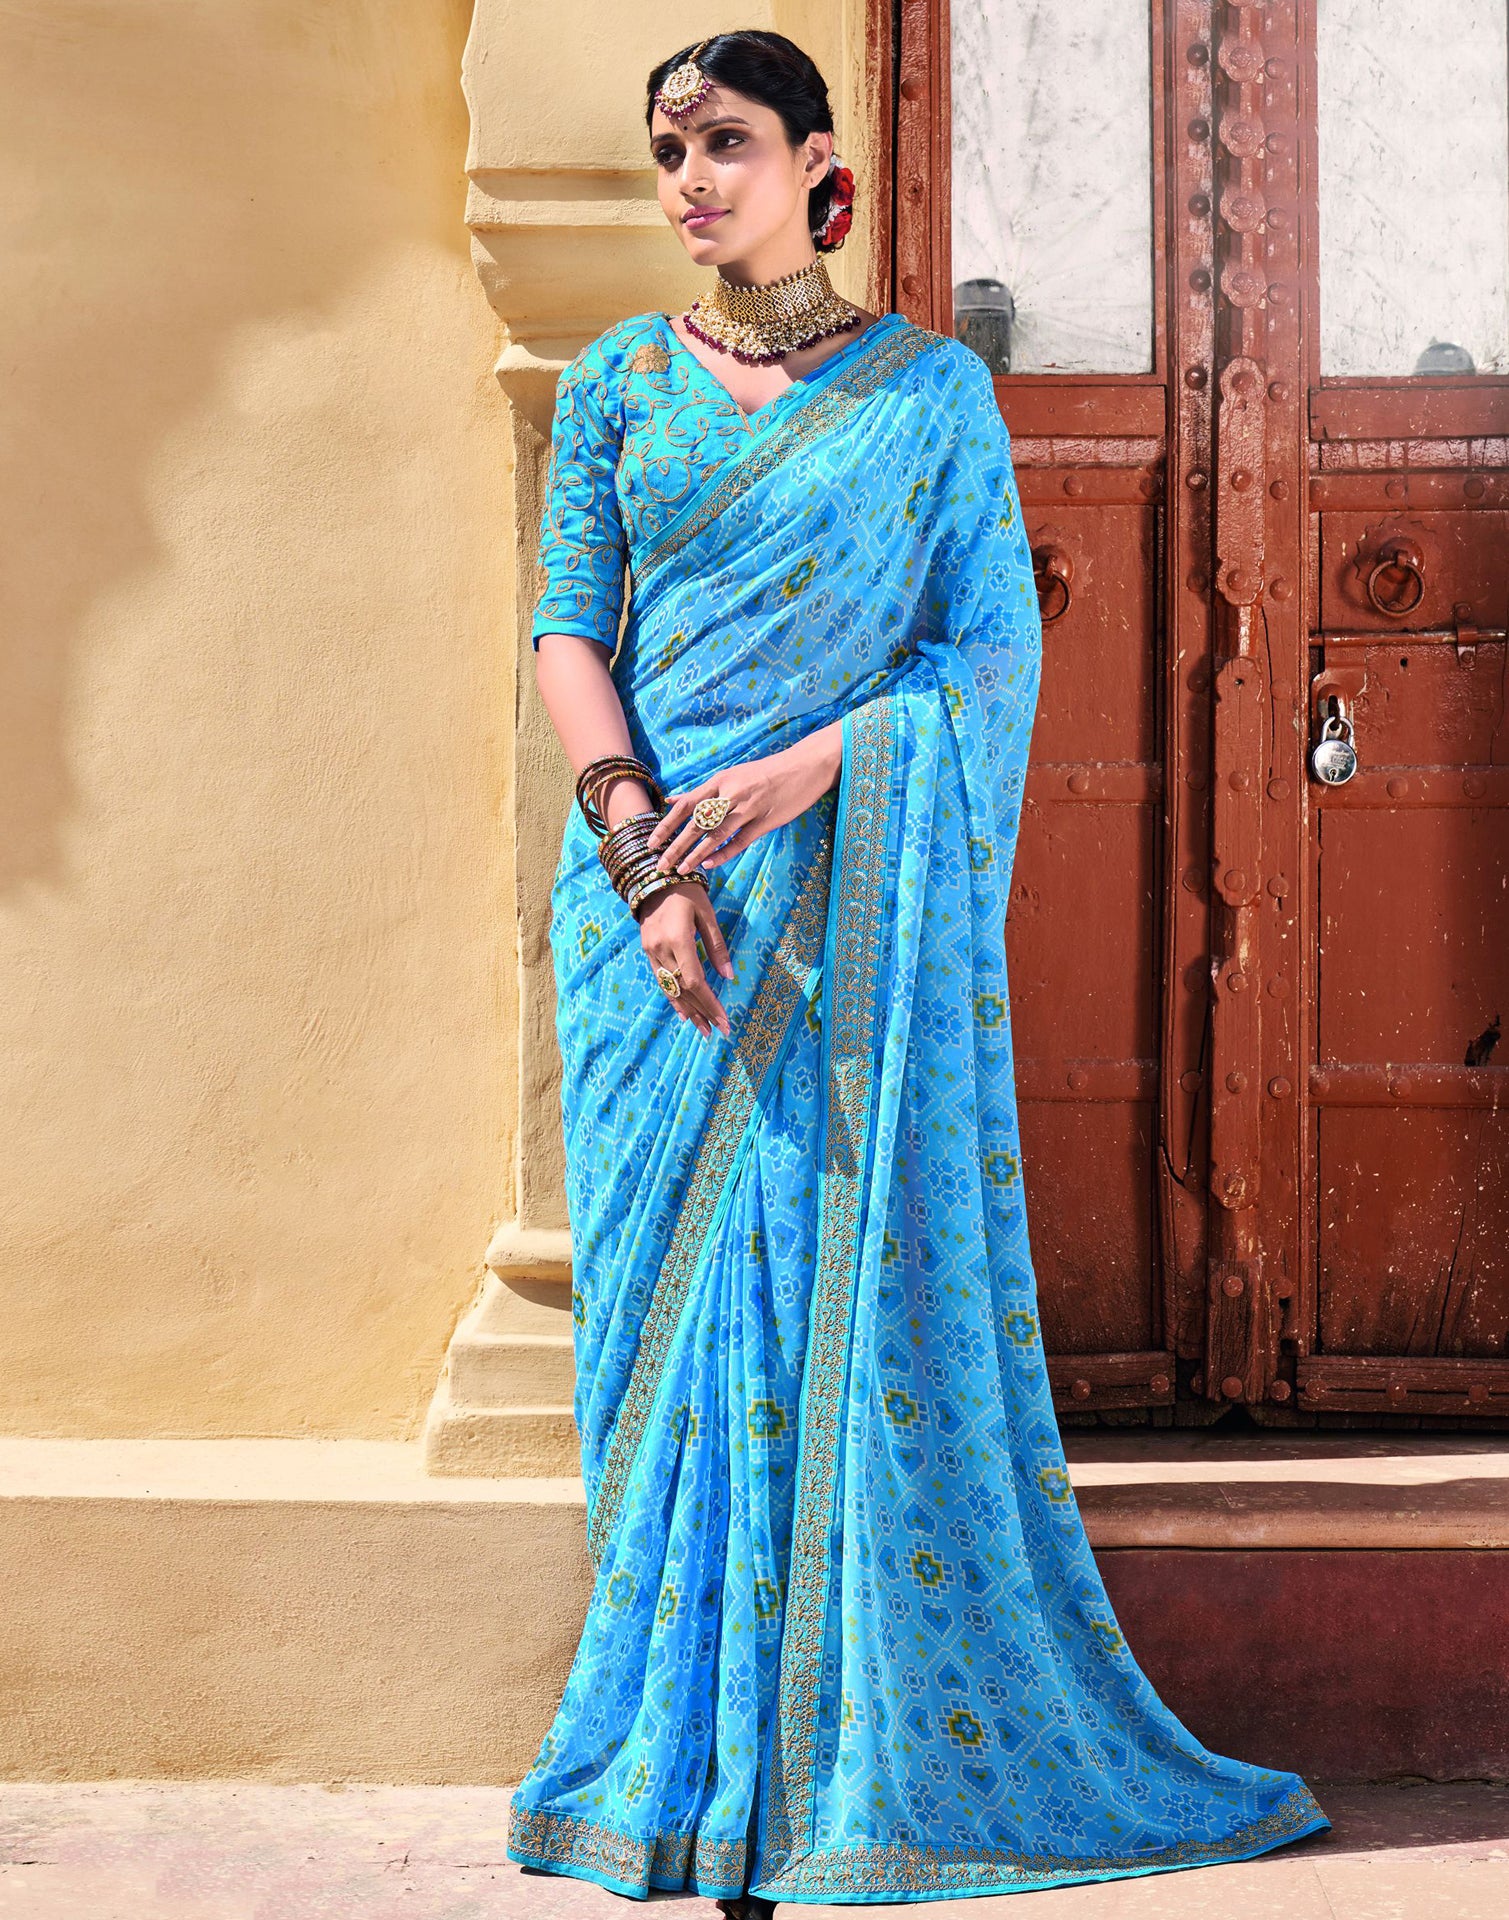 Sunlight Silk Heavy Party Wear Sky Blue Saree For Special Look